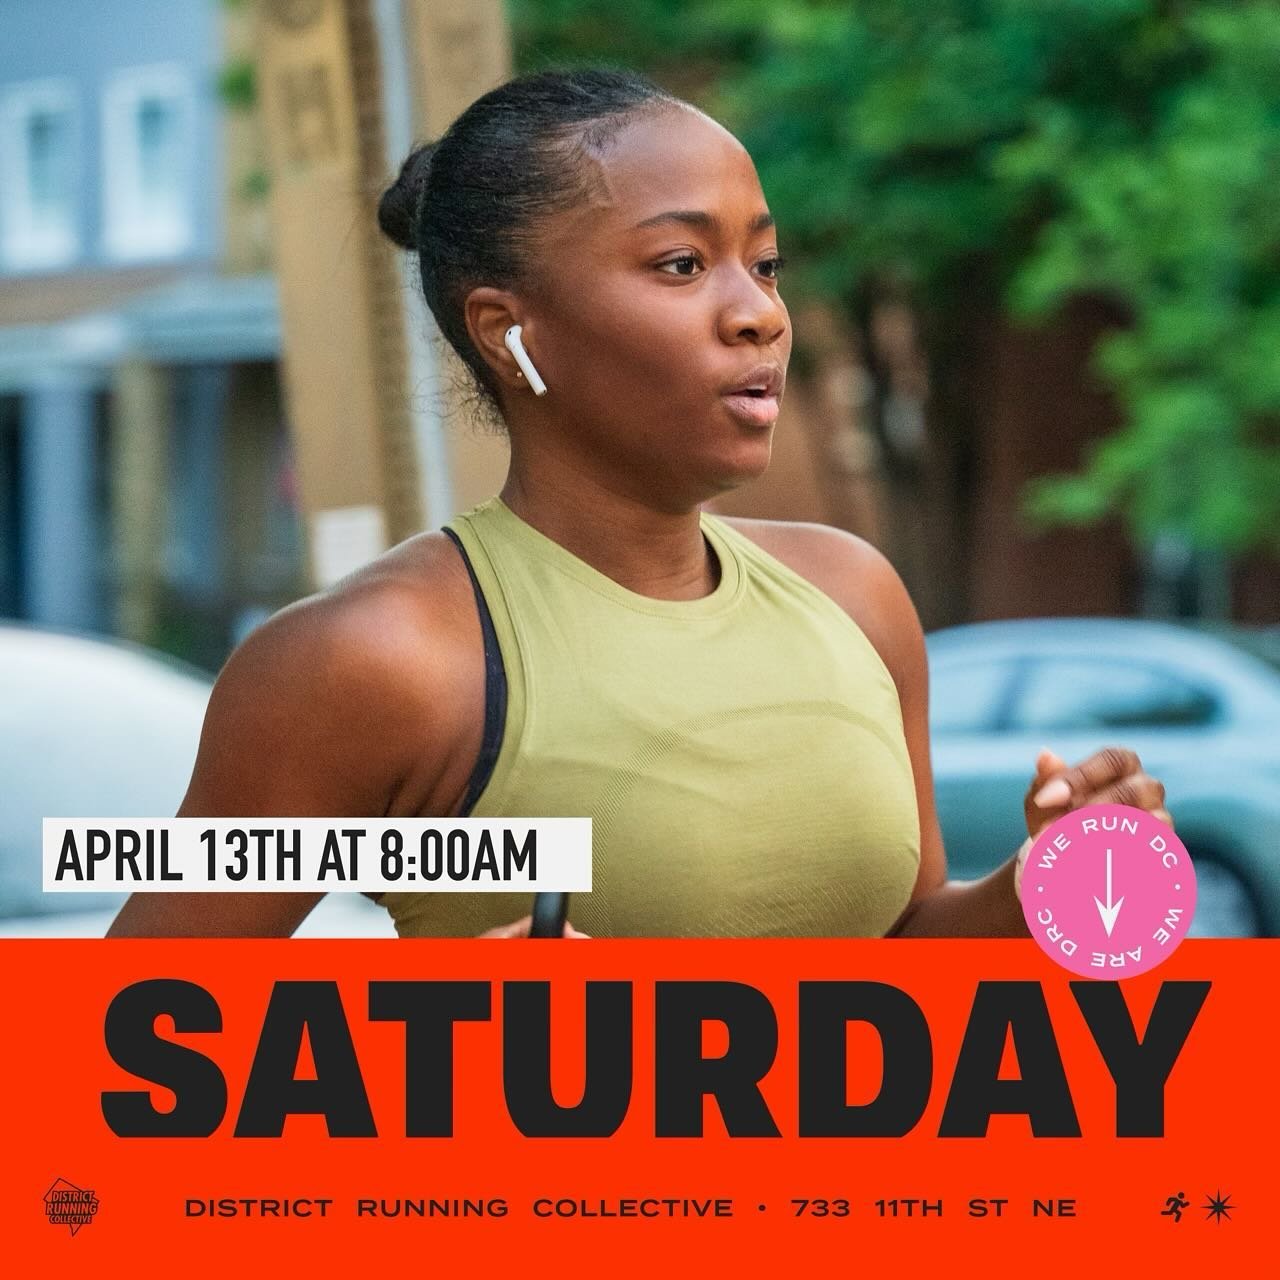 It&rsquo;s true, Saturday runs are back! Meet us tomorrow for 5 and 8 mile options. RSVP link in bio. 
#rundrc